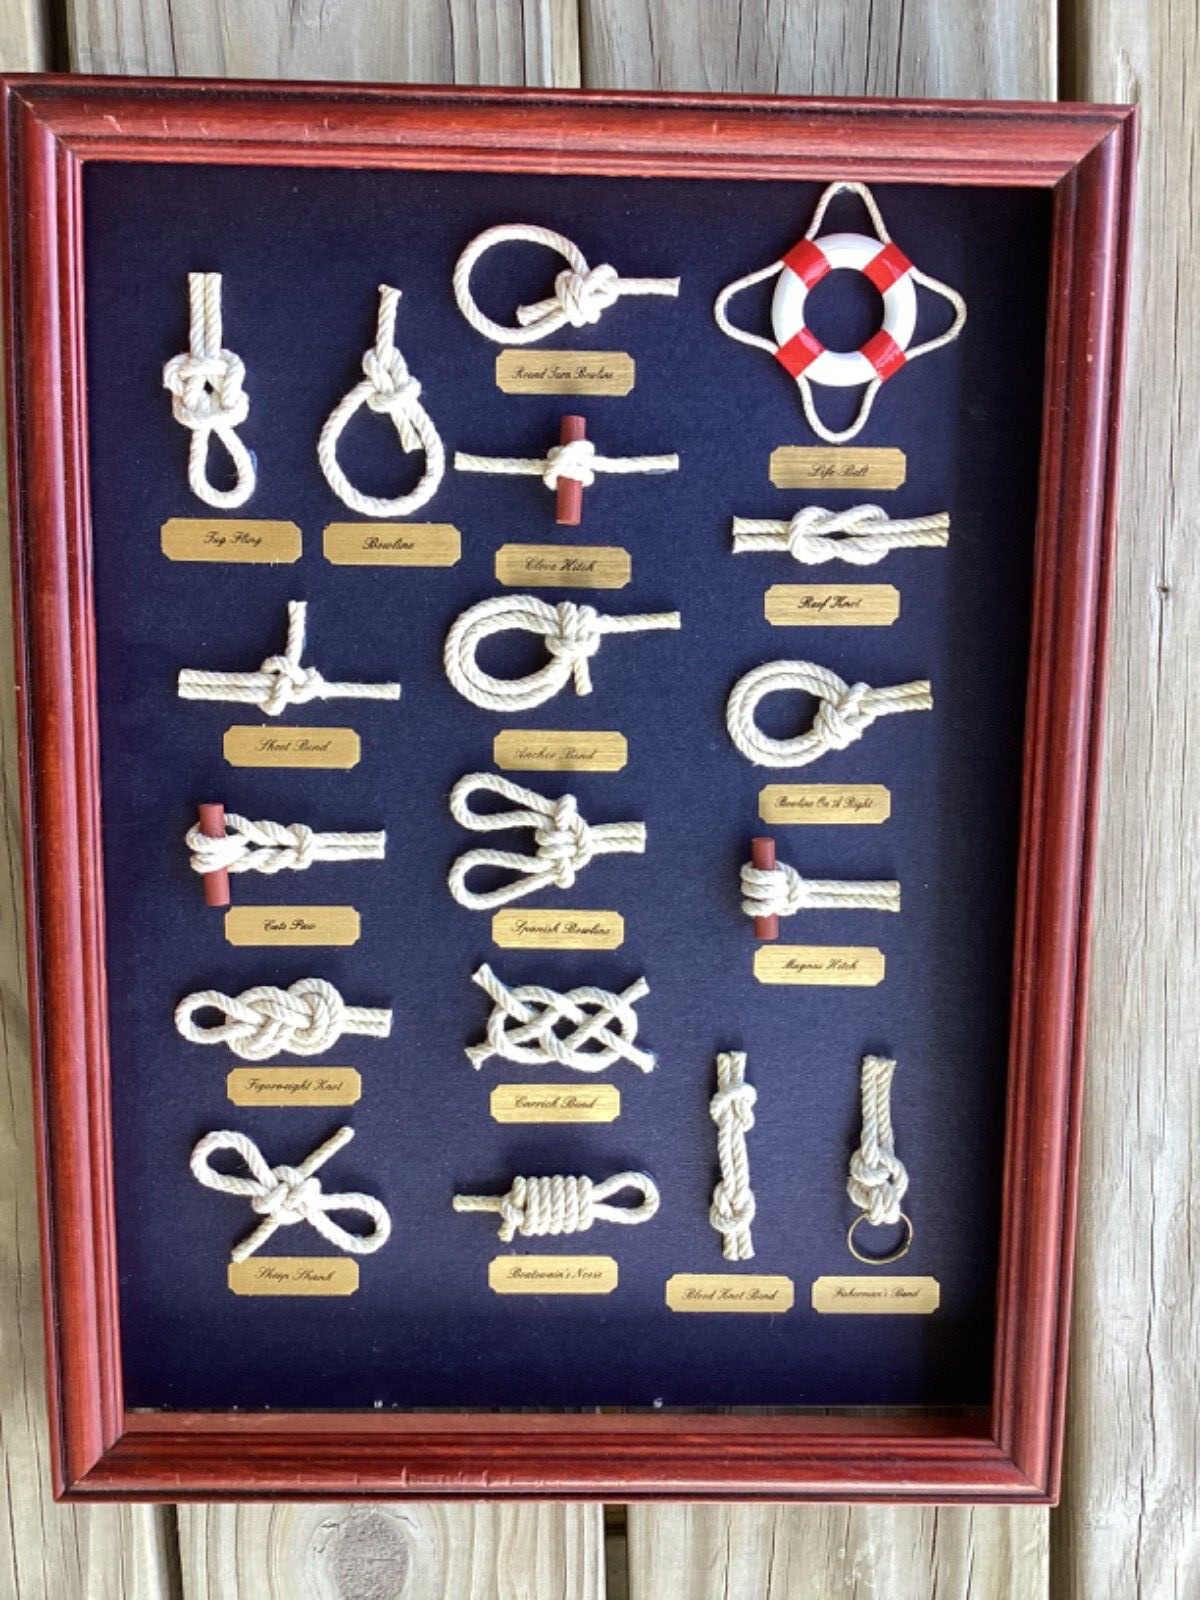 Vintage Sailor's Nautical Knots Shadow Box Framed, approximately 16”x12”